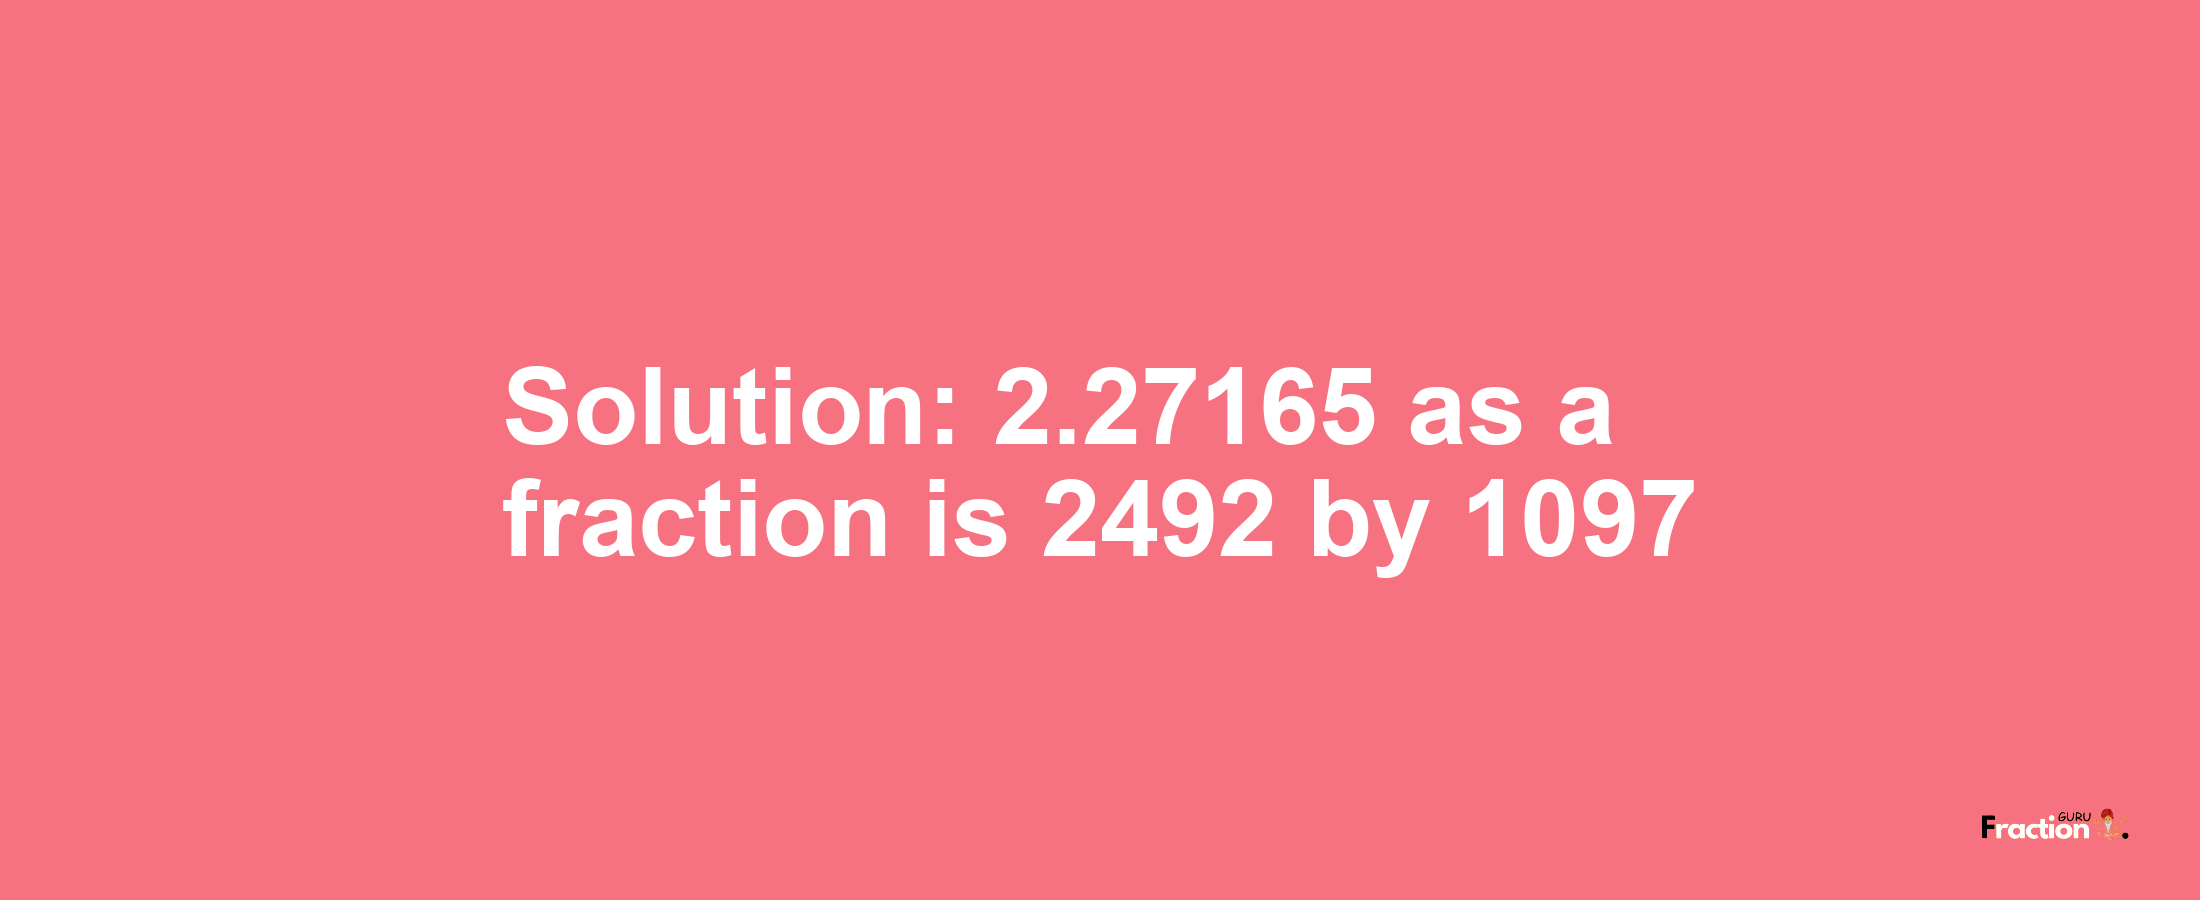 Solution:2.27165 as a fraction is 2492/1097